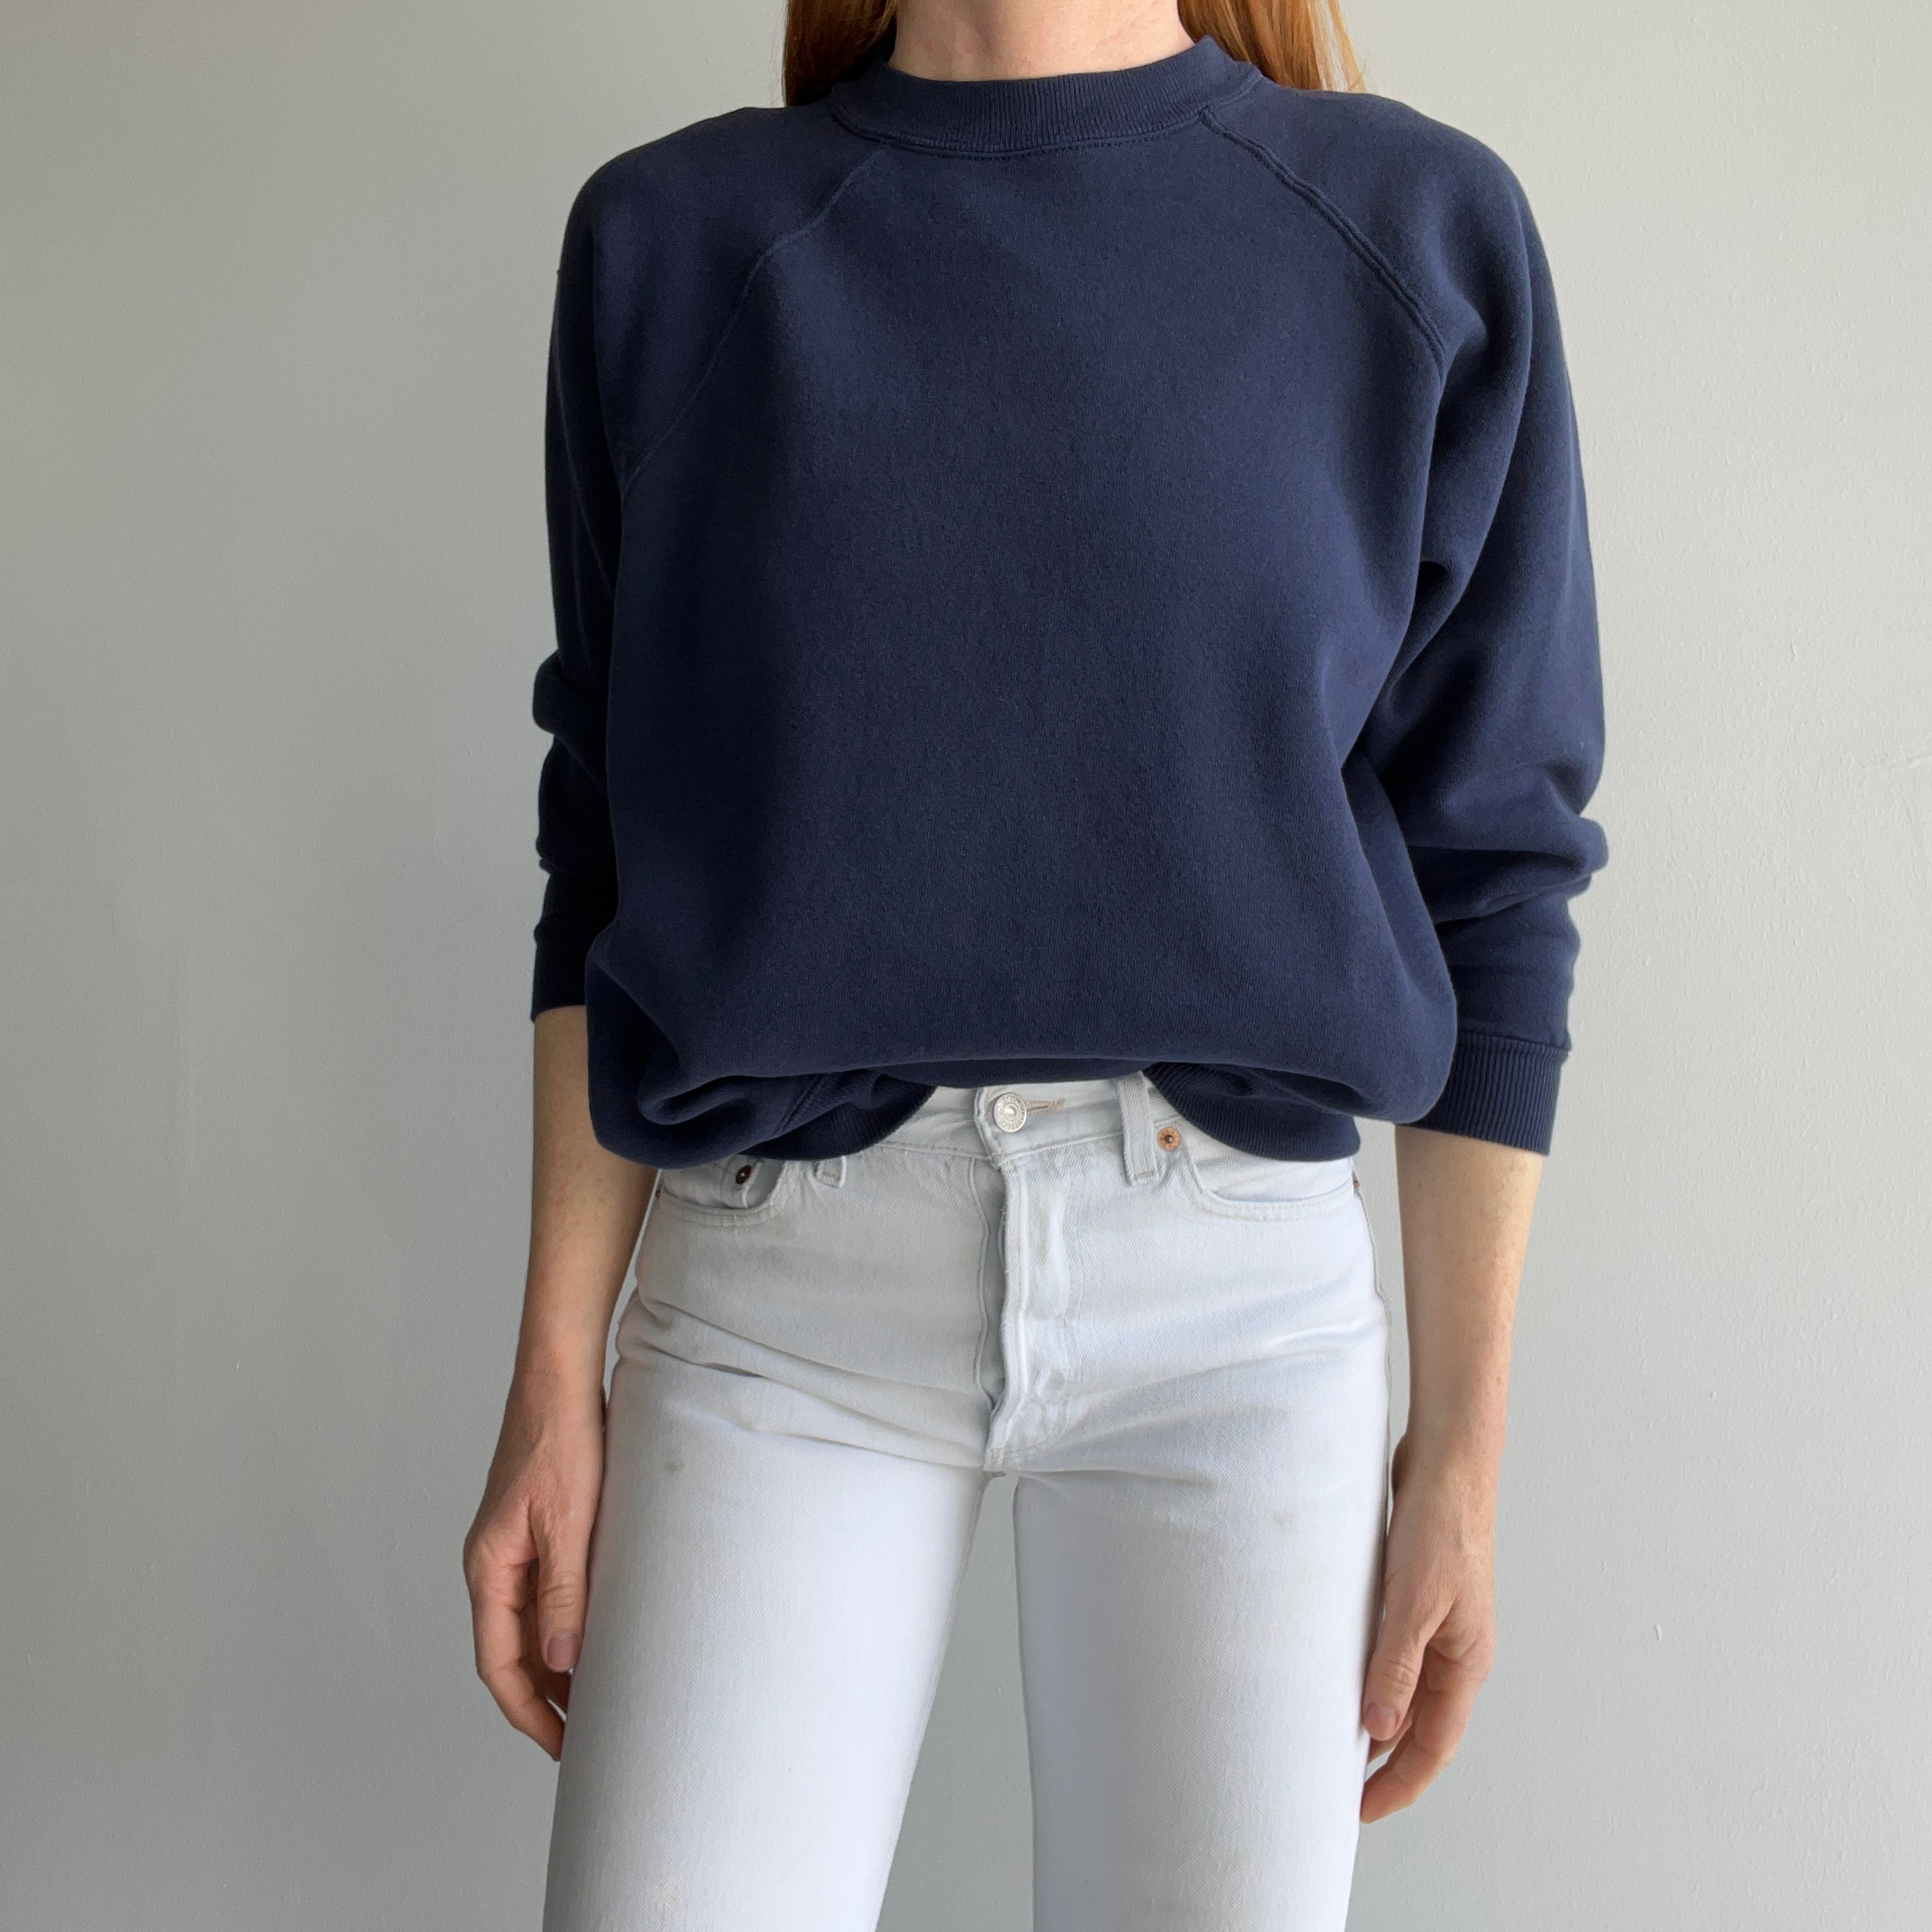 1990s Perfectly Faded Navy Raglan by HHW